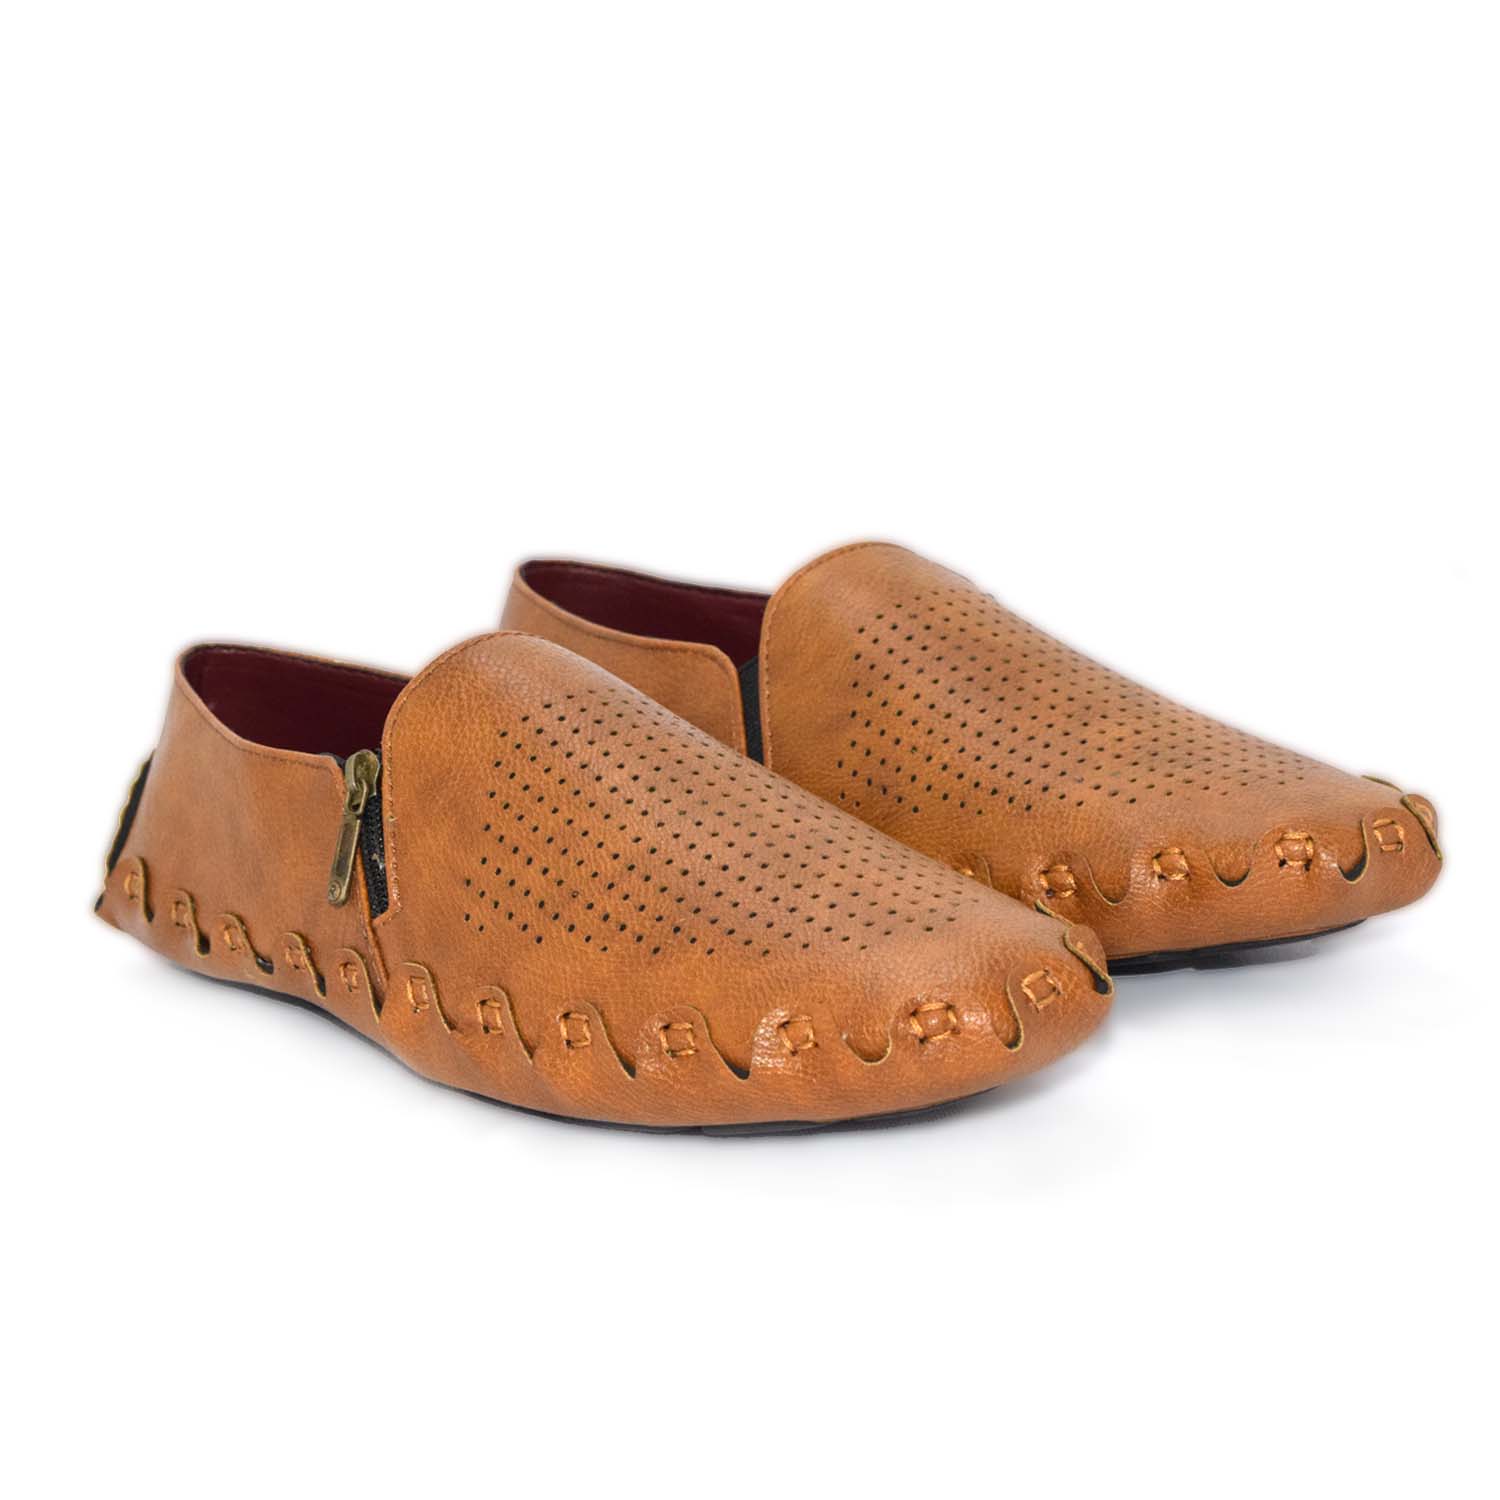 Buy Alberto Calza Easywalk Driving Shoes Online @ ₹1499 from ShopClues